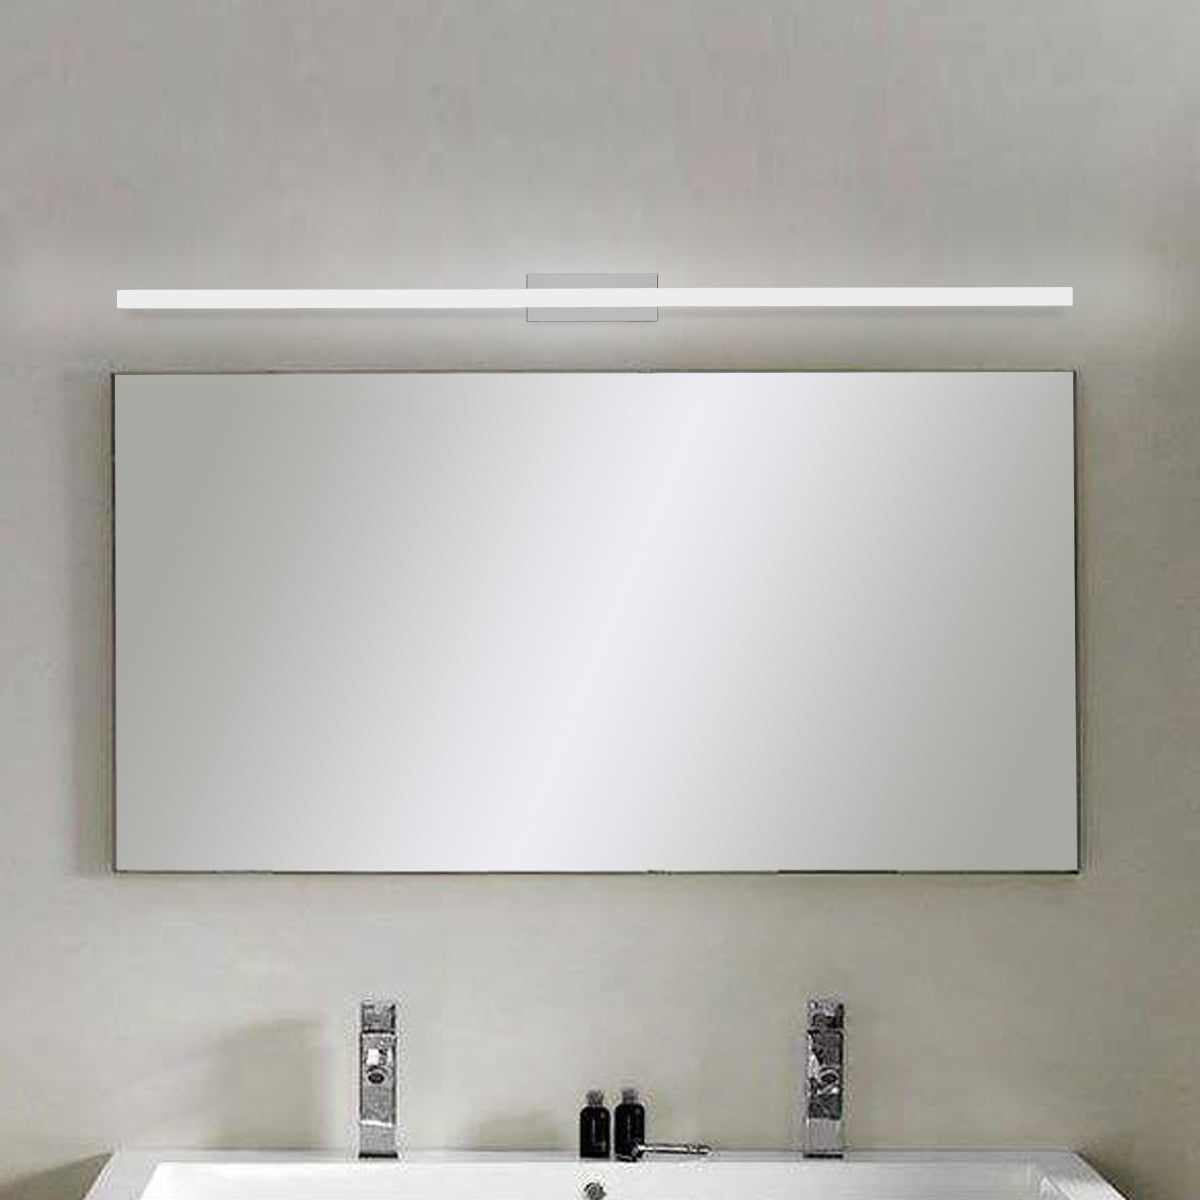 Details about   12W Modern Bathroom LED Crystal Mirror Light Front Wall Lamp Fixture Vanity Lamp 